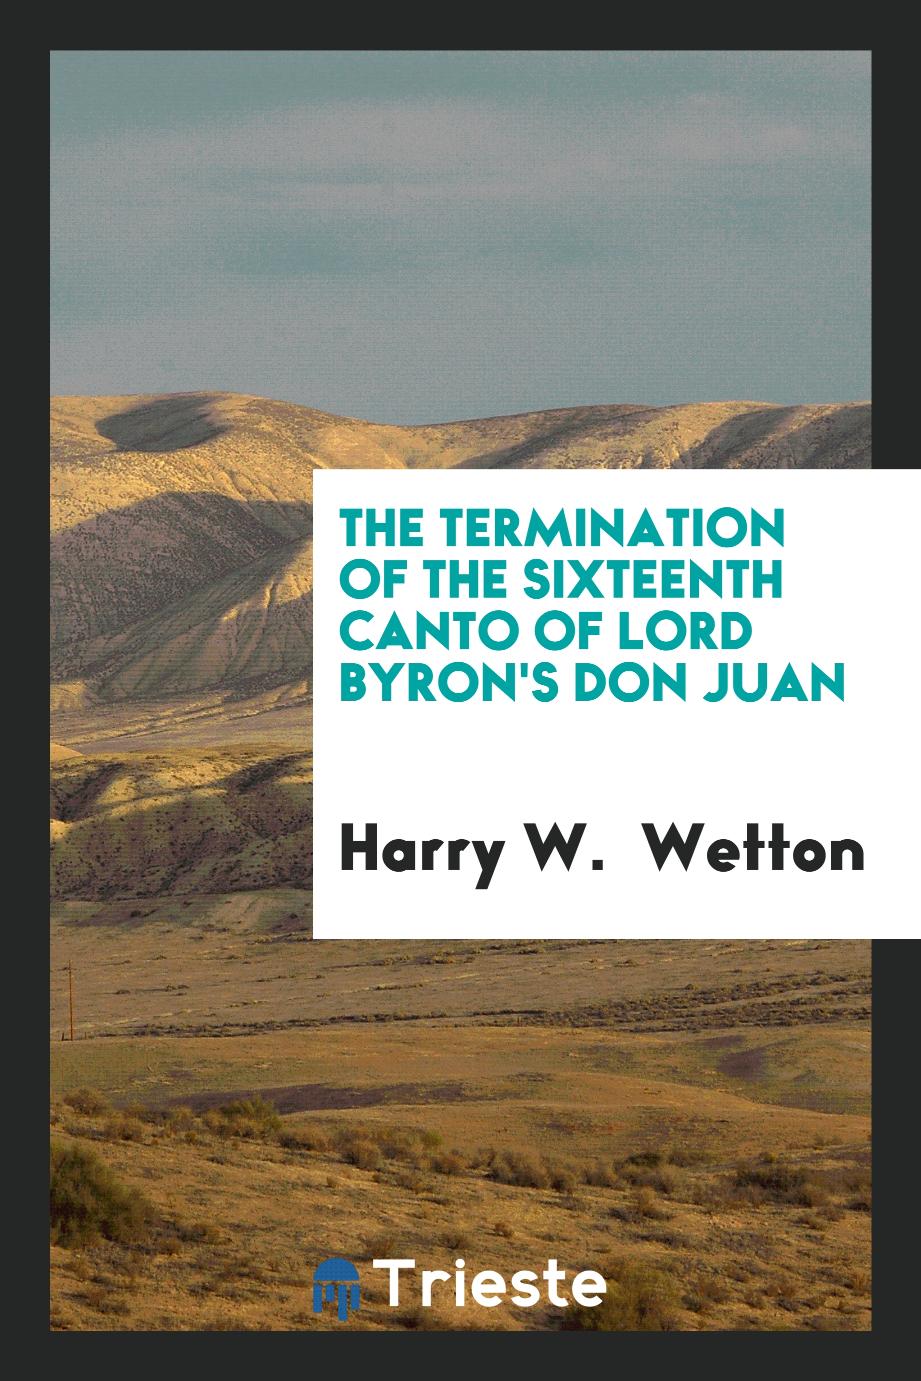 The termination of the sixteenth canto of lord Byron's Don Juan